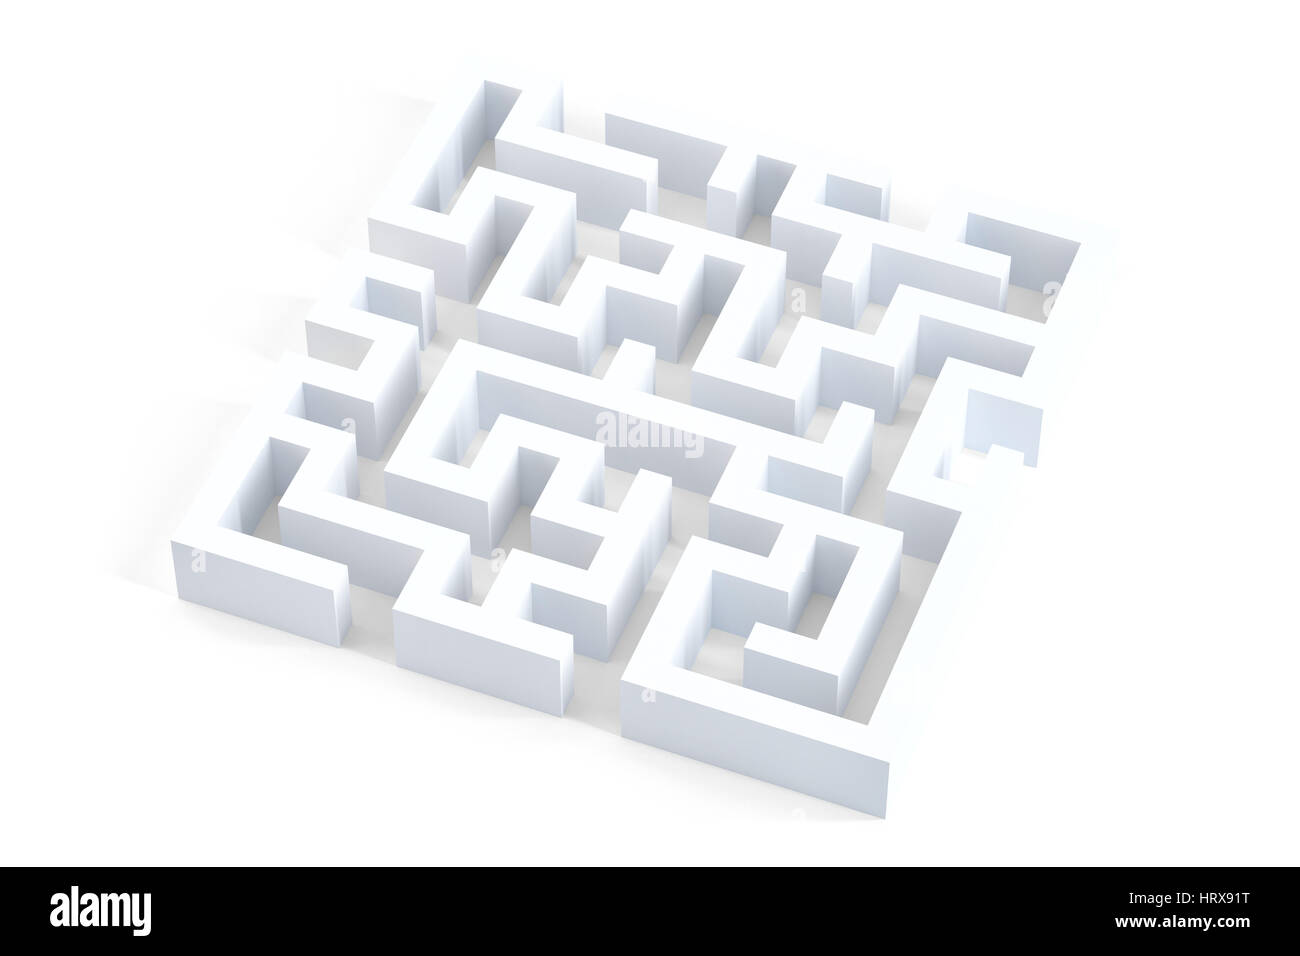 Isolated 3d white maze. Contains clipping path. Stock Photo